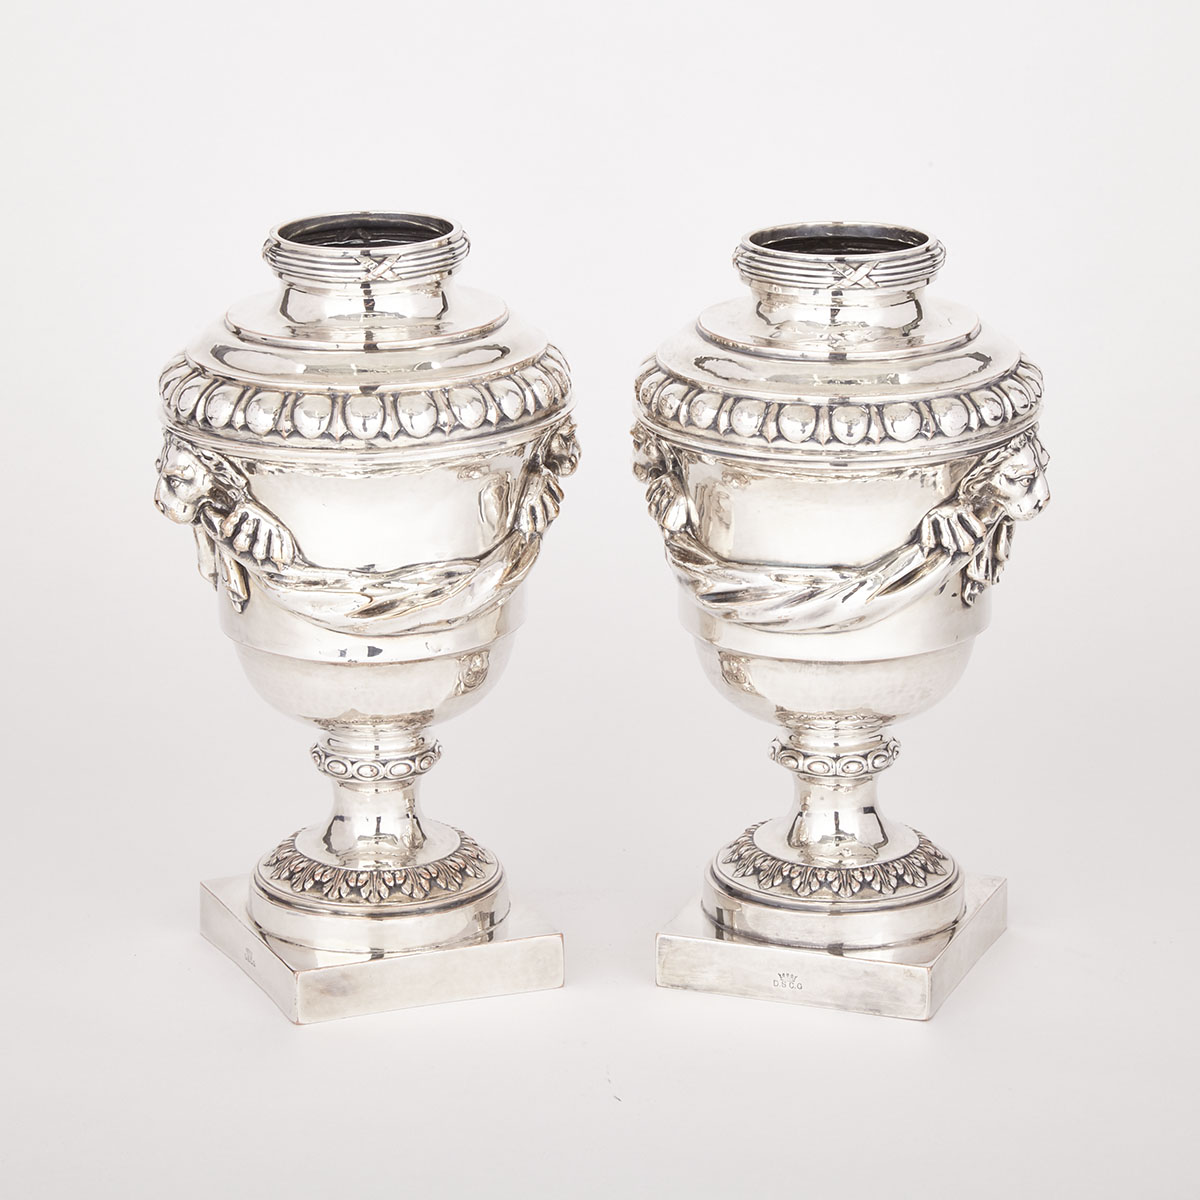 Pair of Duchess of Sutherland’s Cripples Guild Arts & Crafts Silver Plated Vases, early 20th century